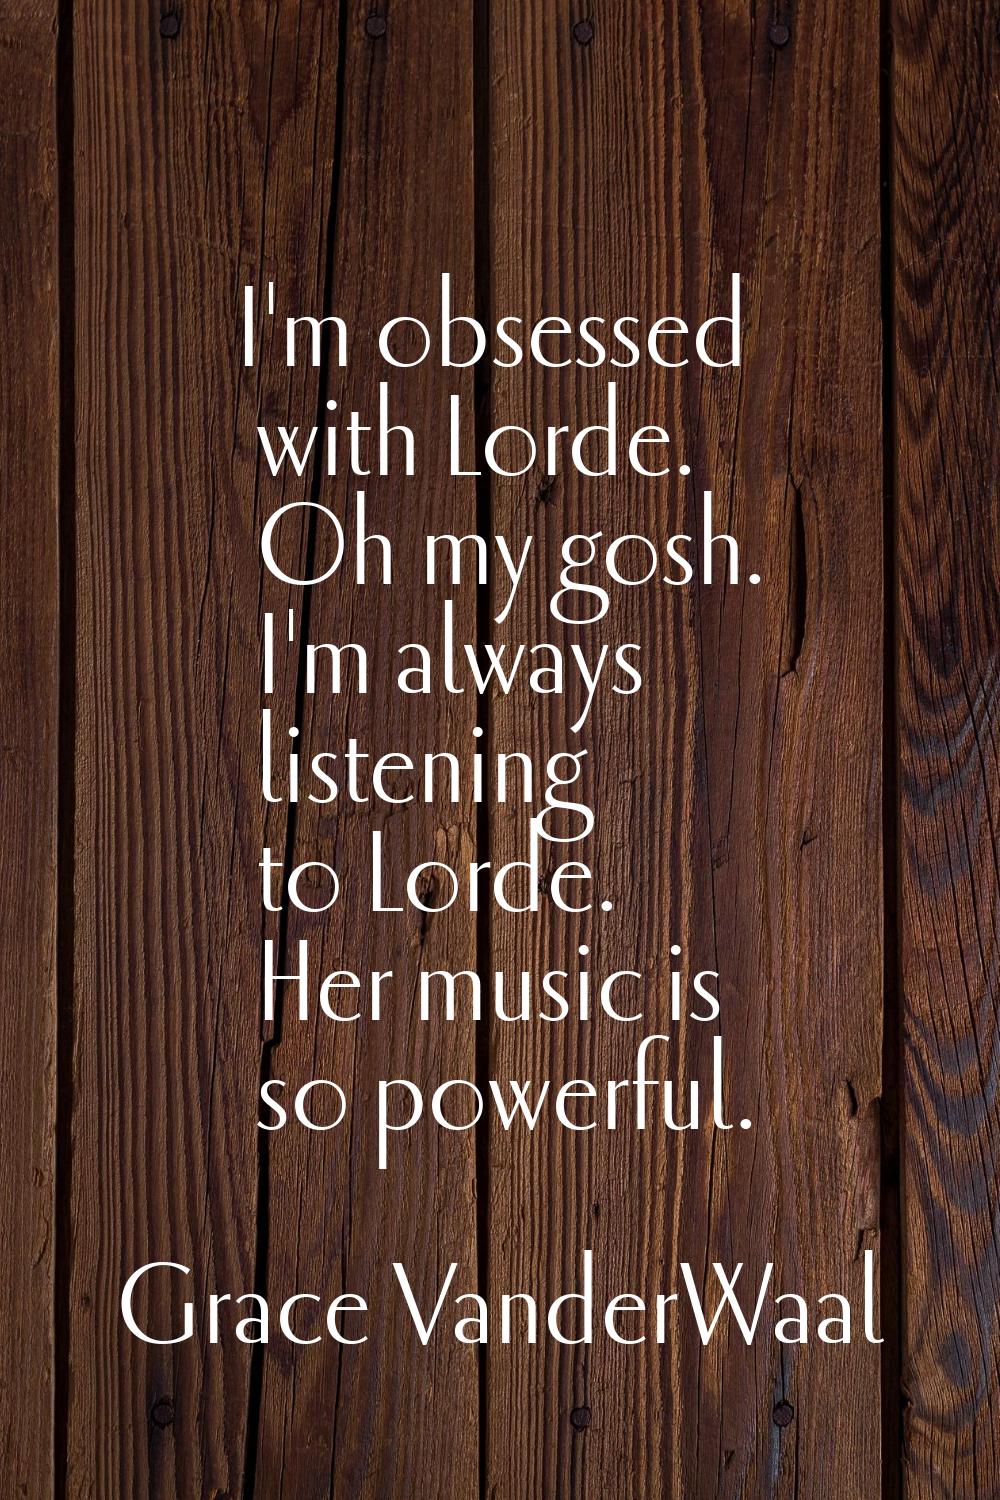 I'm obsessed with Lorde. Oh my gosh. I'm always listening to Lorde. Her music is so powerful.